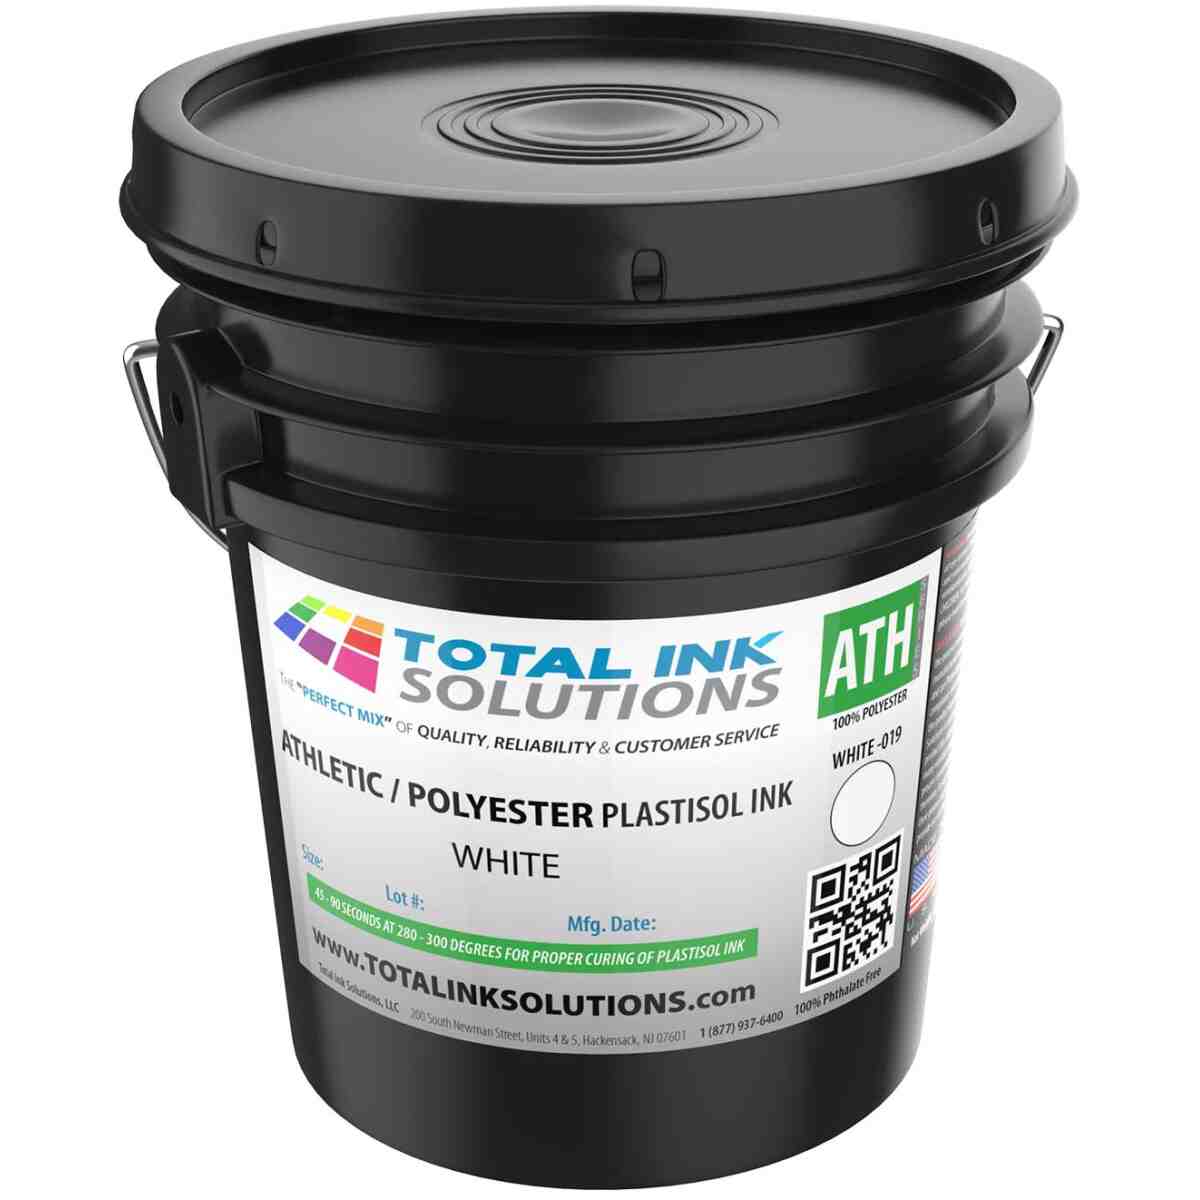 Athletic 100% Polyester Plastisol Ink - White - 5 Gallon TOTAL INK SOLUTIONS®